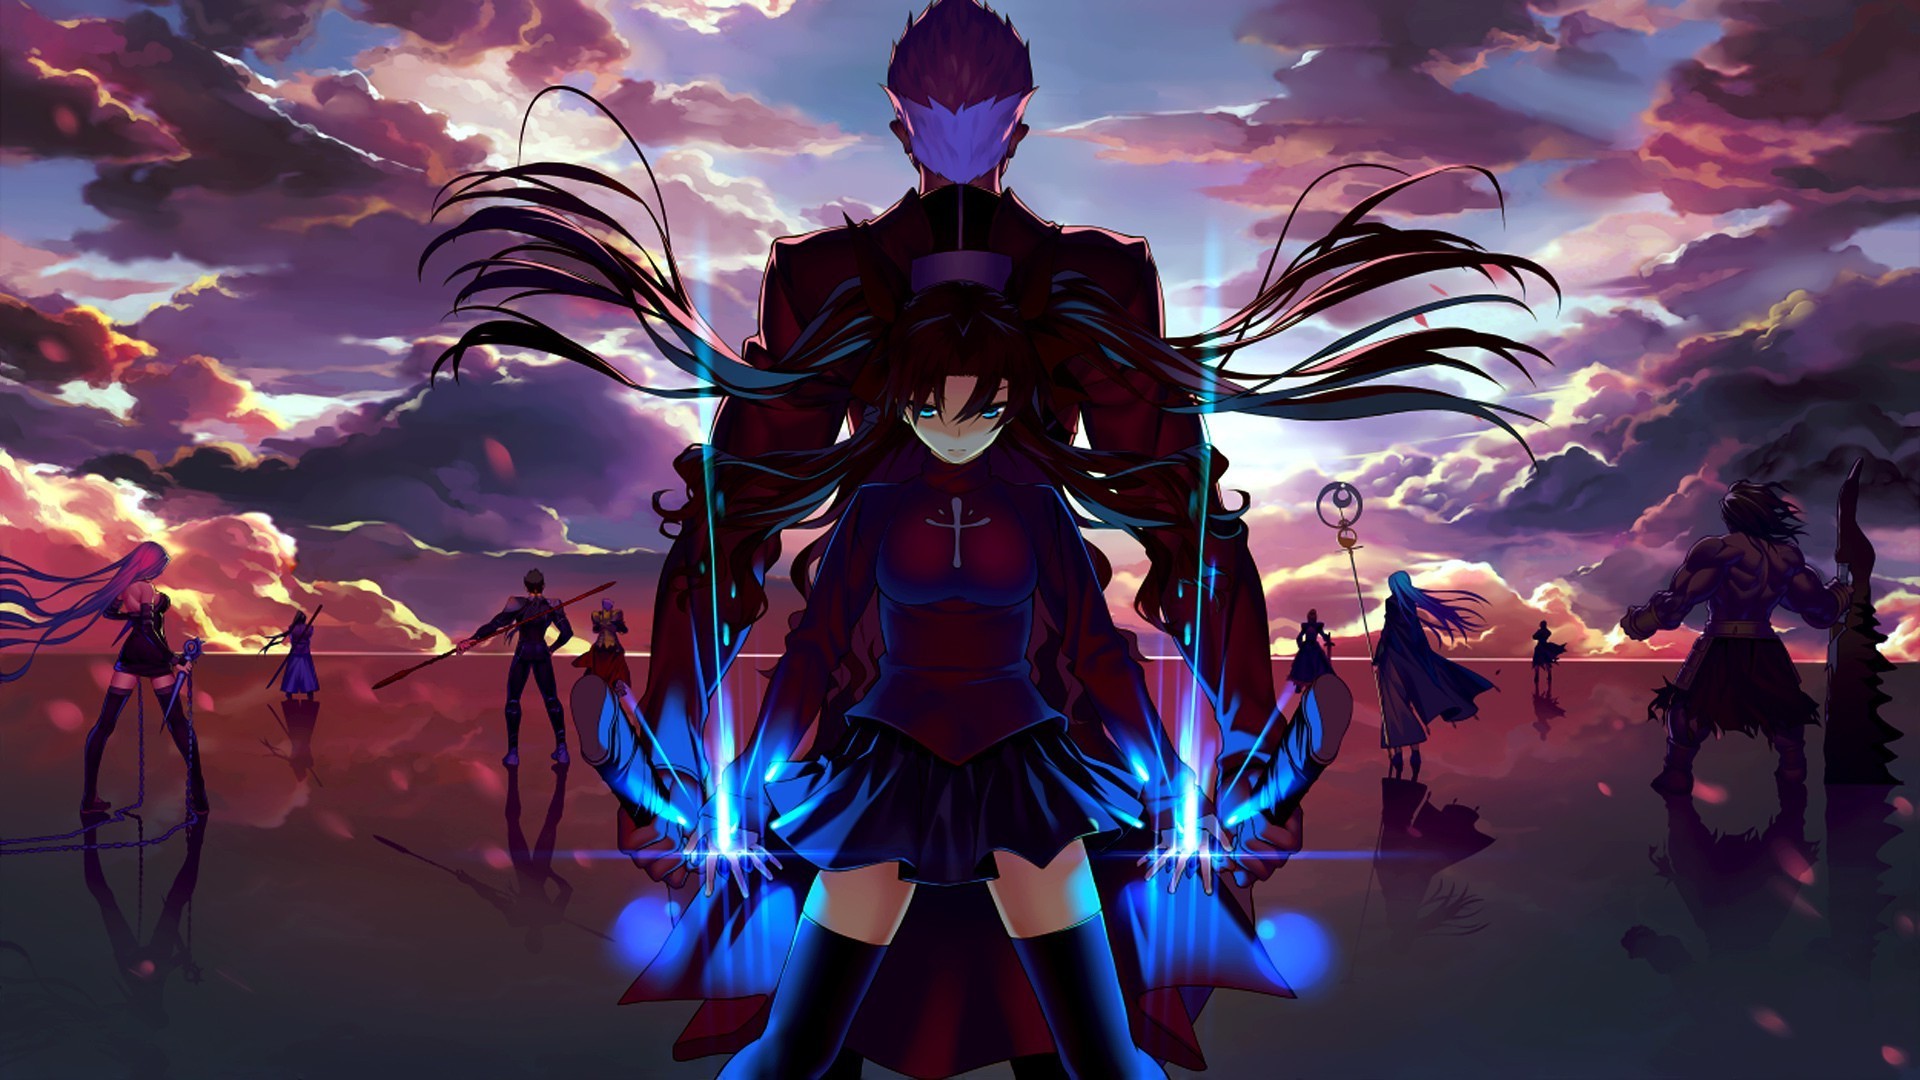 Fate Stay Night wallpaper ·① Download free amazing HD backgrounds for